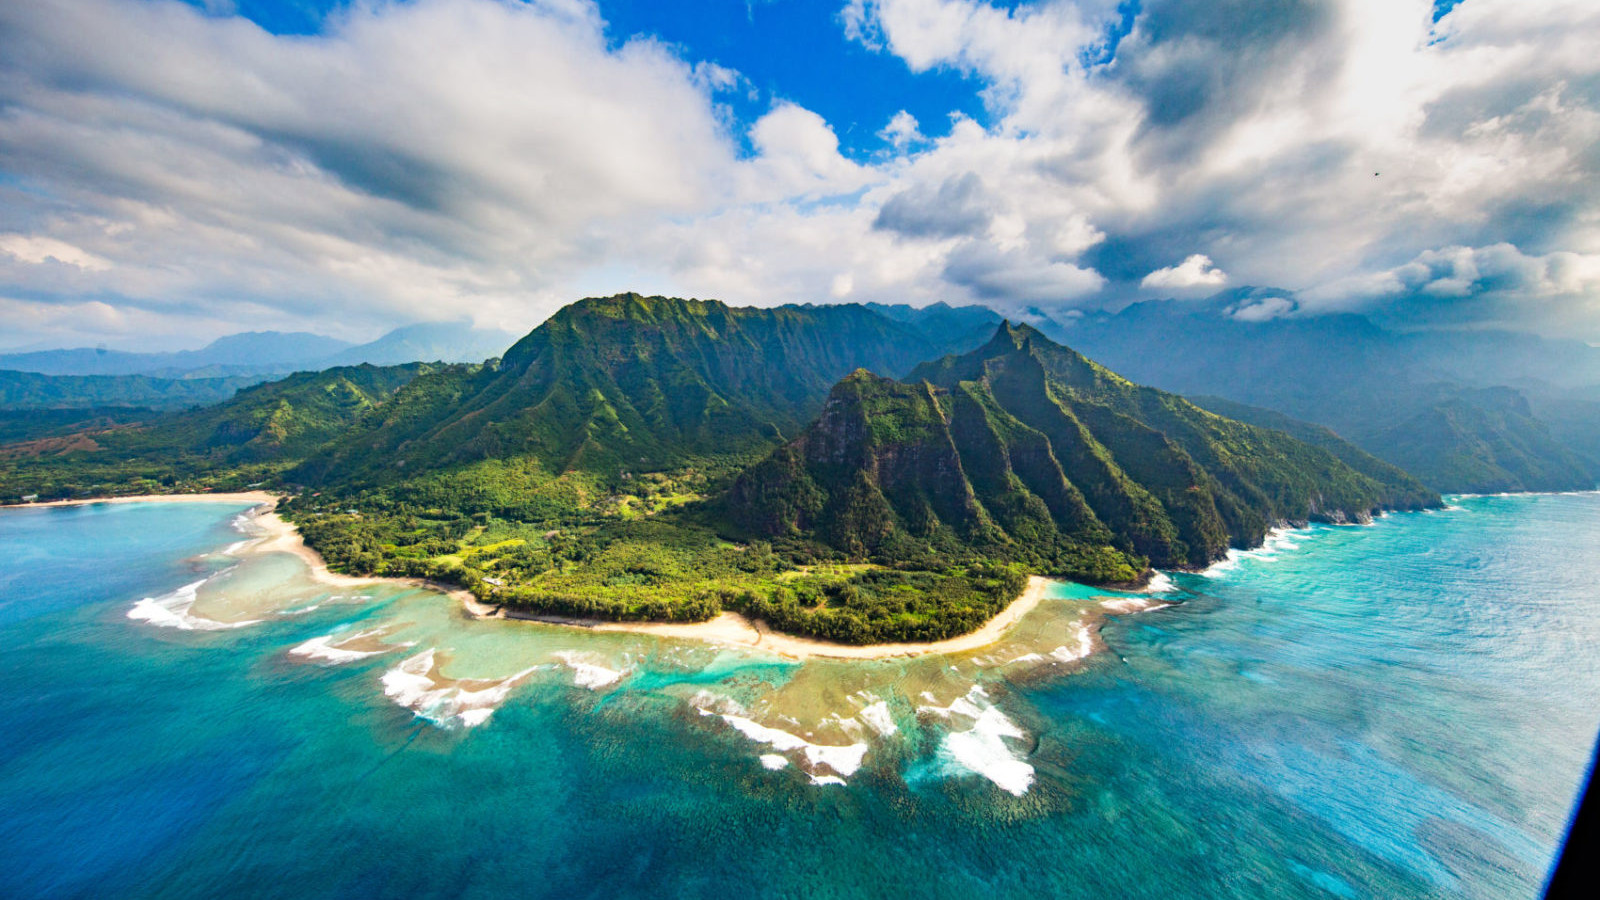 7 Things to do in Hawaii